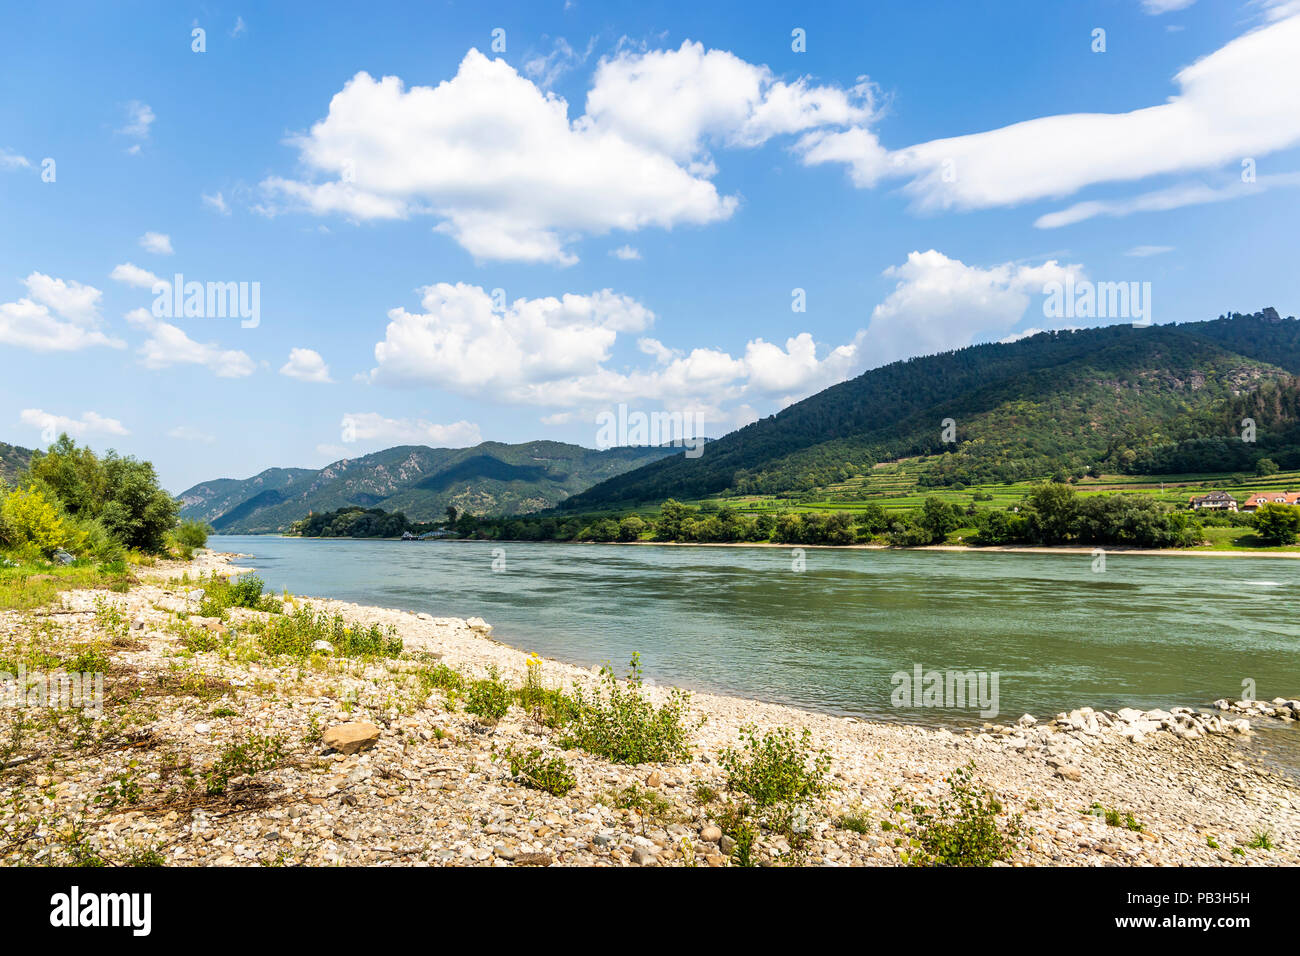 The bank of the Danube River and blue sky. Wachau valley. Austria. Stock Photo